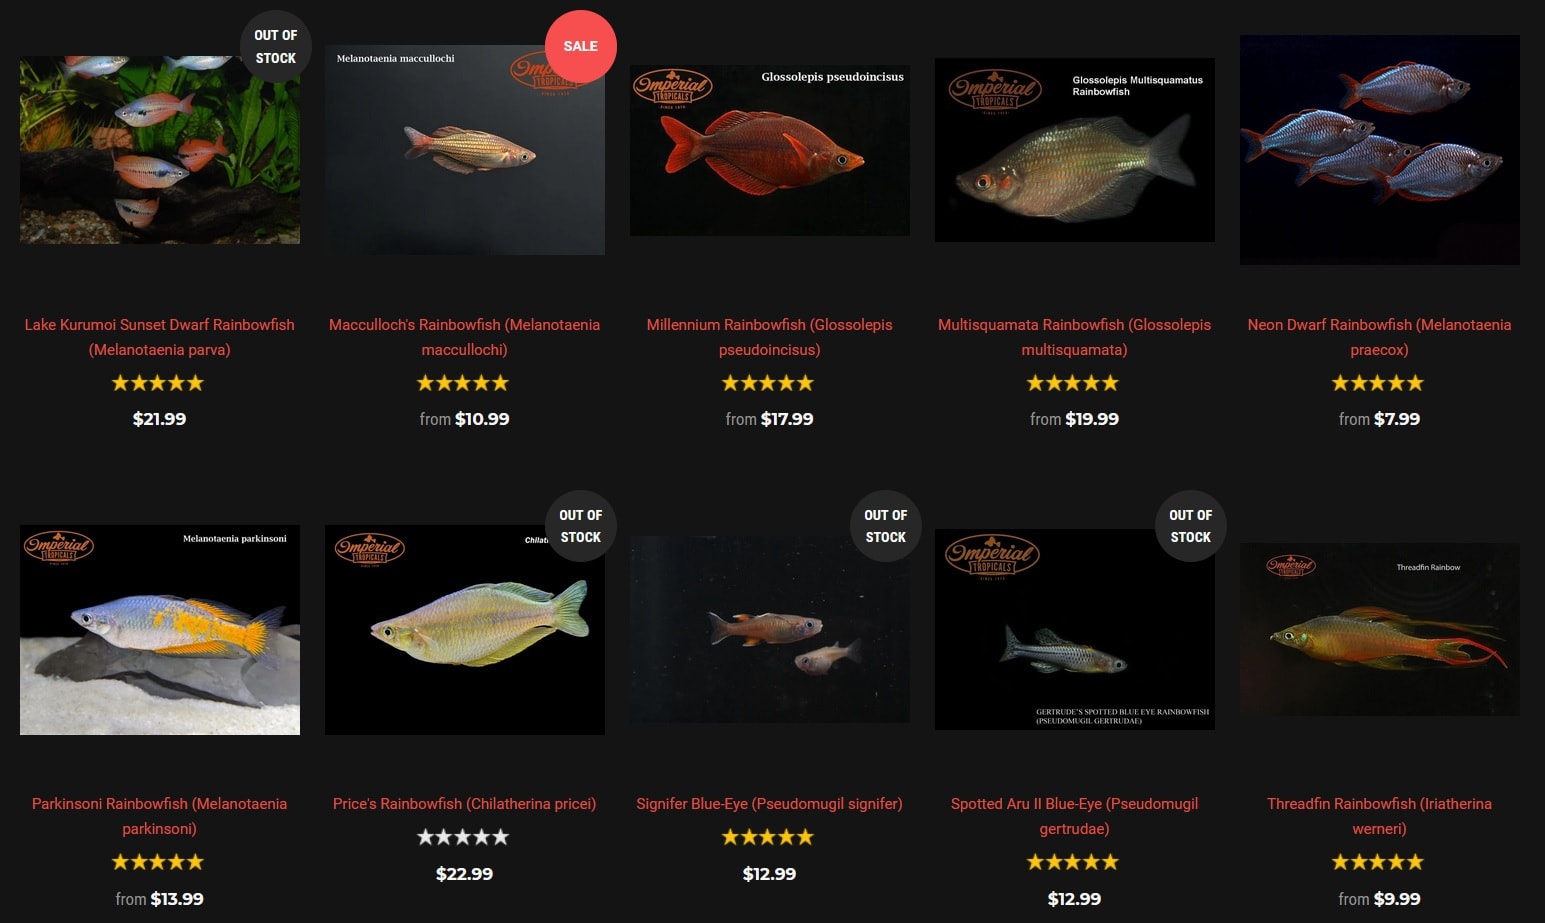 imperialtropicals has a good selection of rainbowfish to buy from